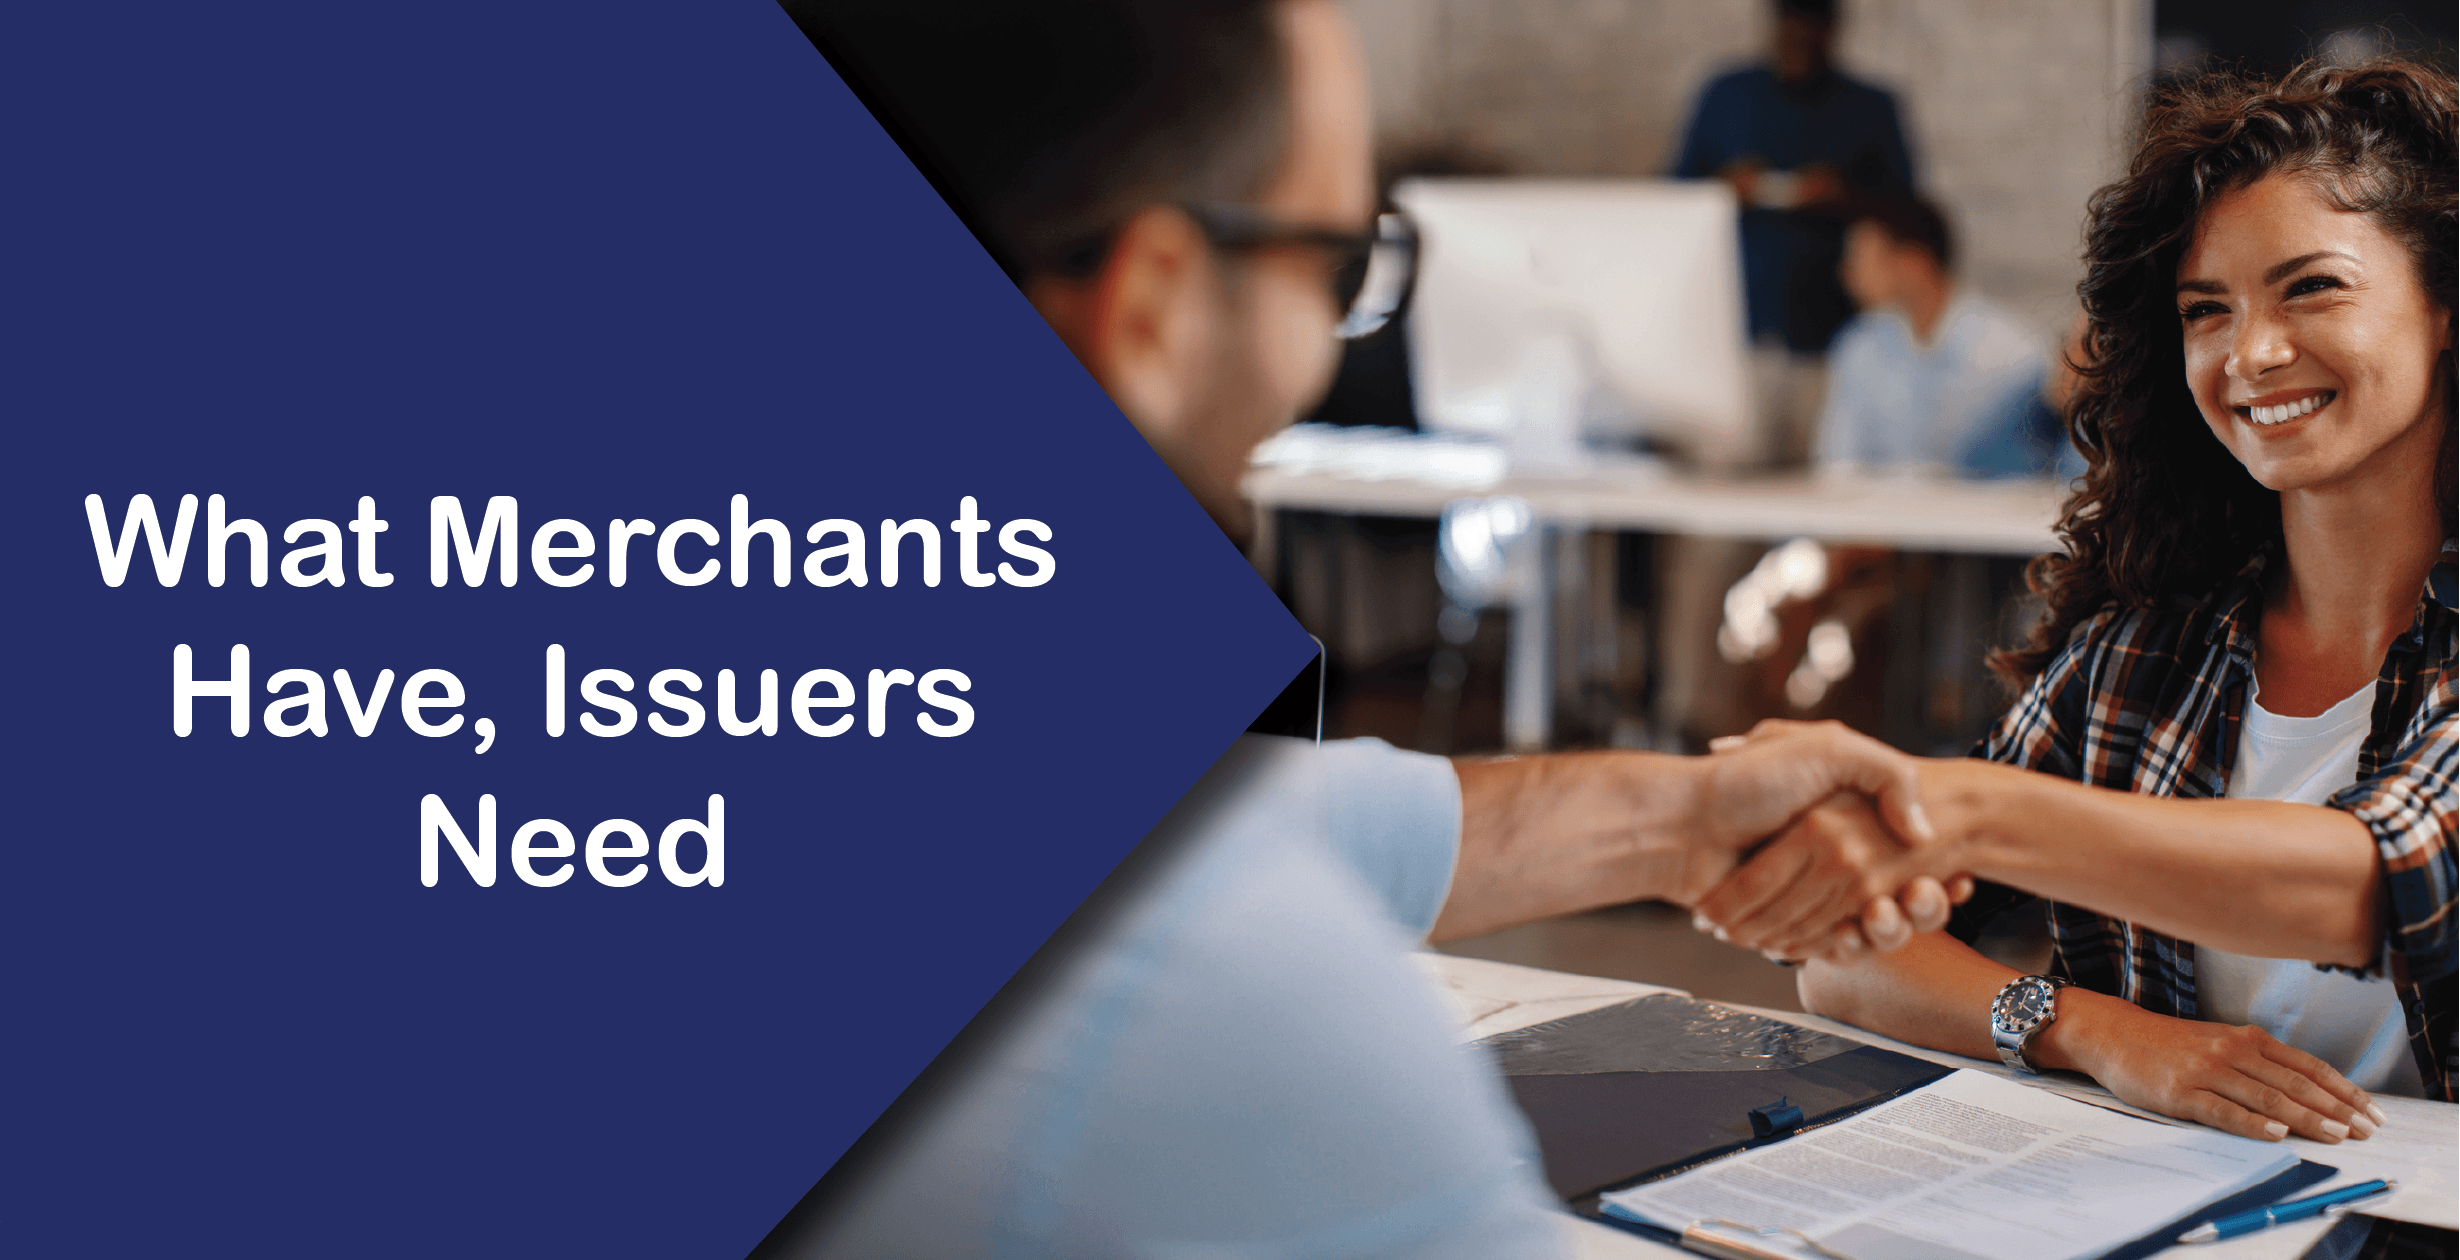 What Merchants Have, Issuers Need